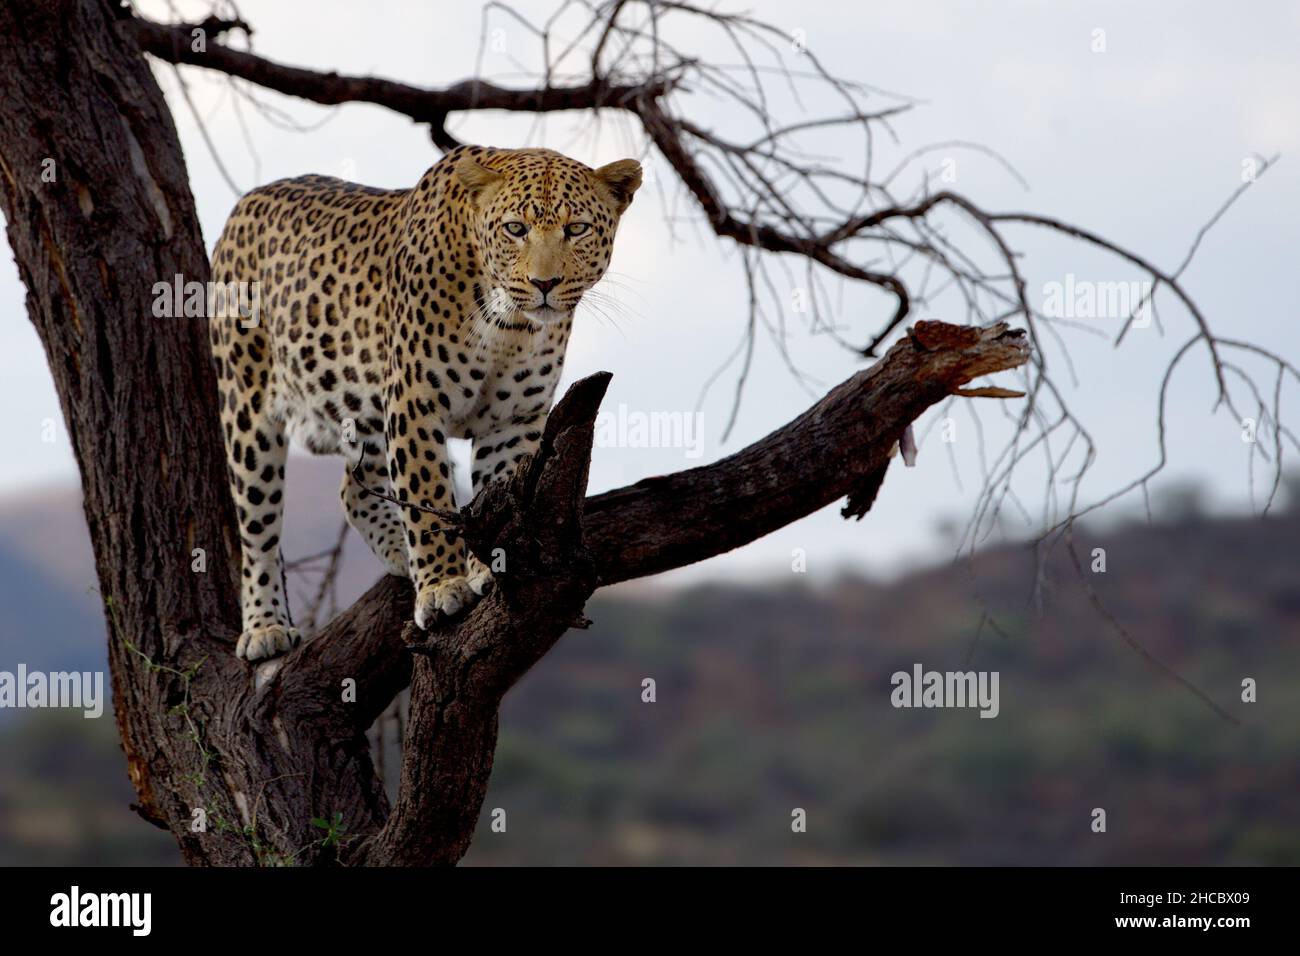 Beautiful shot of a cheetah standing on the branch of tree in Nam Stock Photo